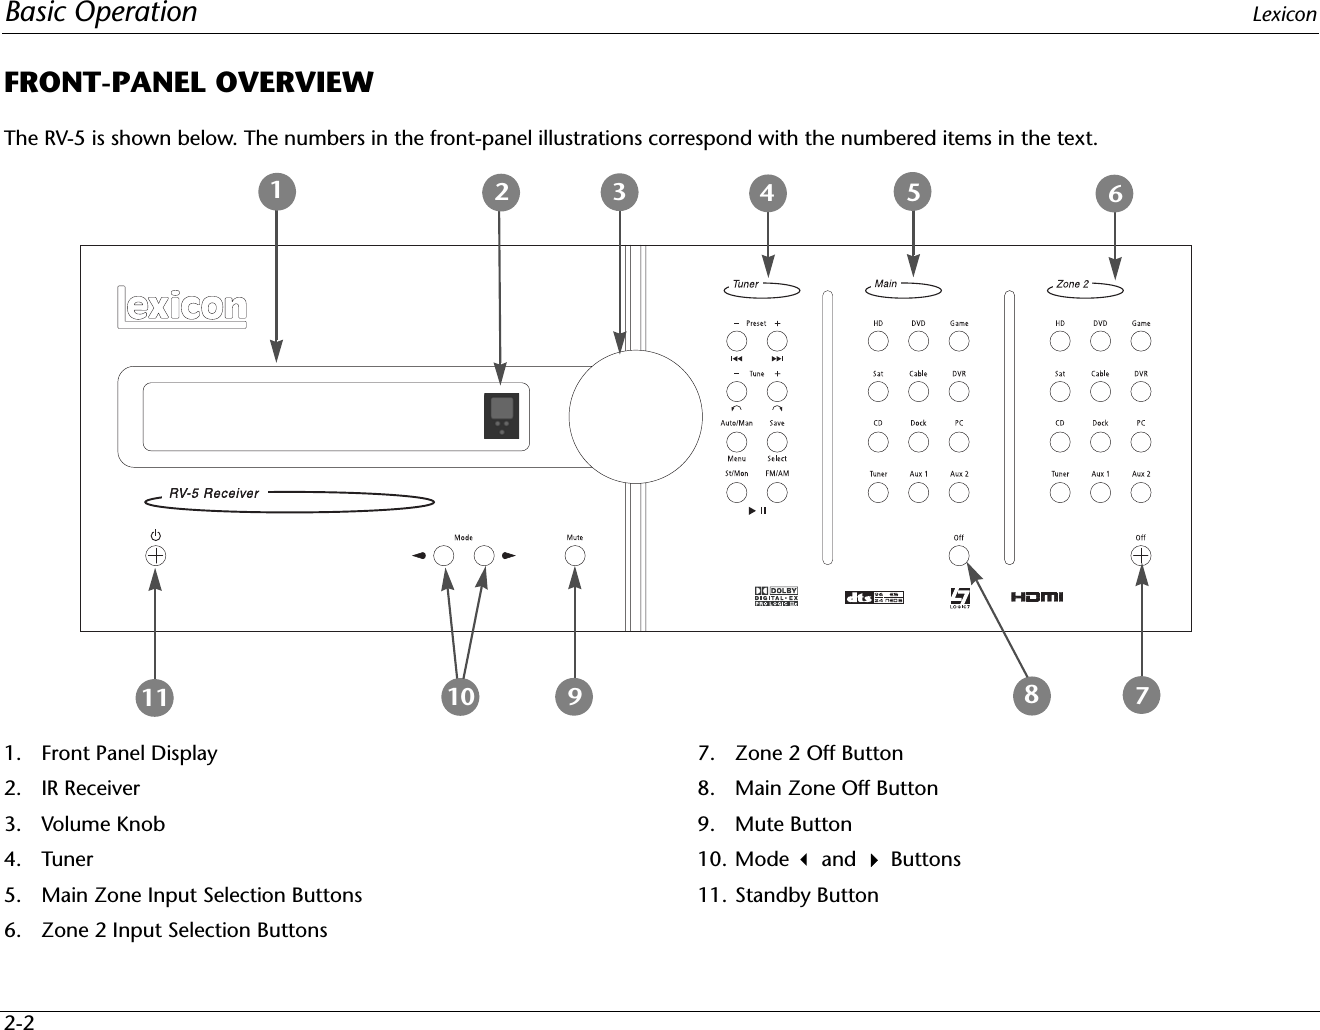 Basic Operation Lexicon2-2FRONT-PANEL OVERVIEWThe RV-5 is shown below. The numbers in the front-panel illustrations correspond with the numbered items in the text.1. Front Panel Display2. IR Receiver3. Volume Knob4. Tuner5. Main Zone Input Selection Buttons6. Zone 2 Input Selection Buttons7. Zone 2 Off Button8. Main Zone Off Button9. Mute Button10. Mode  and  Buttons11. Standby Button8712345610 911